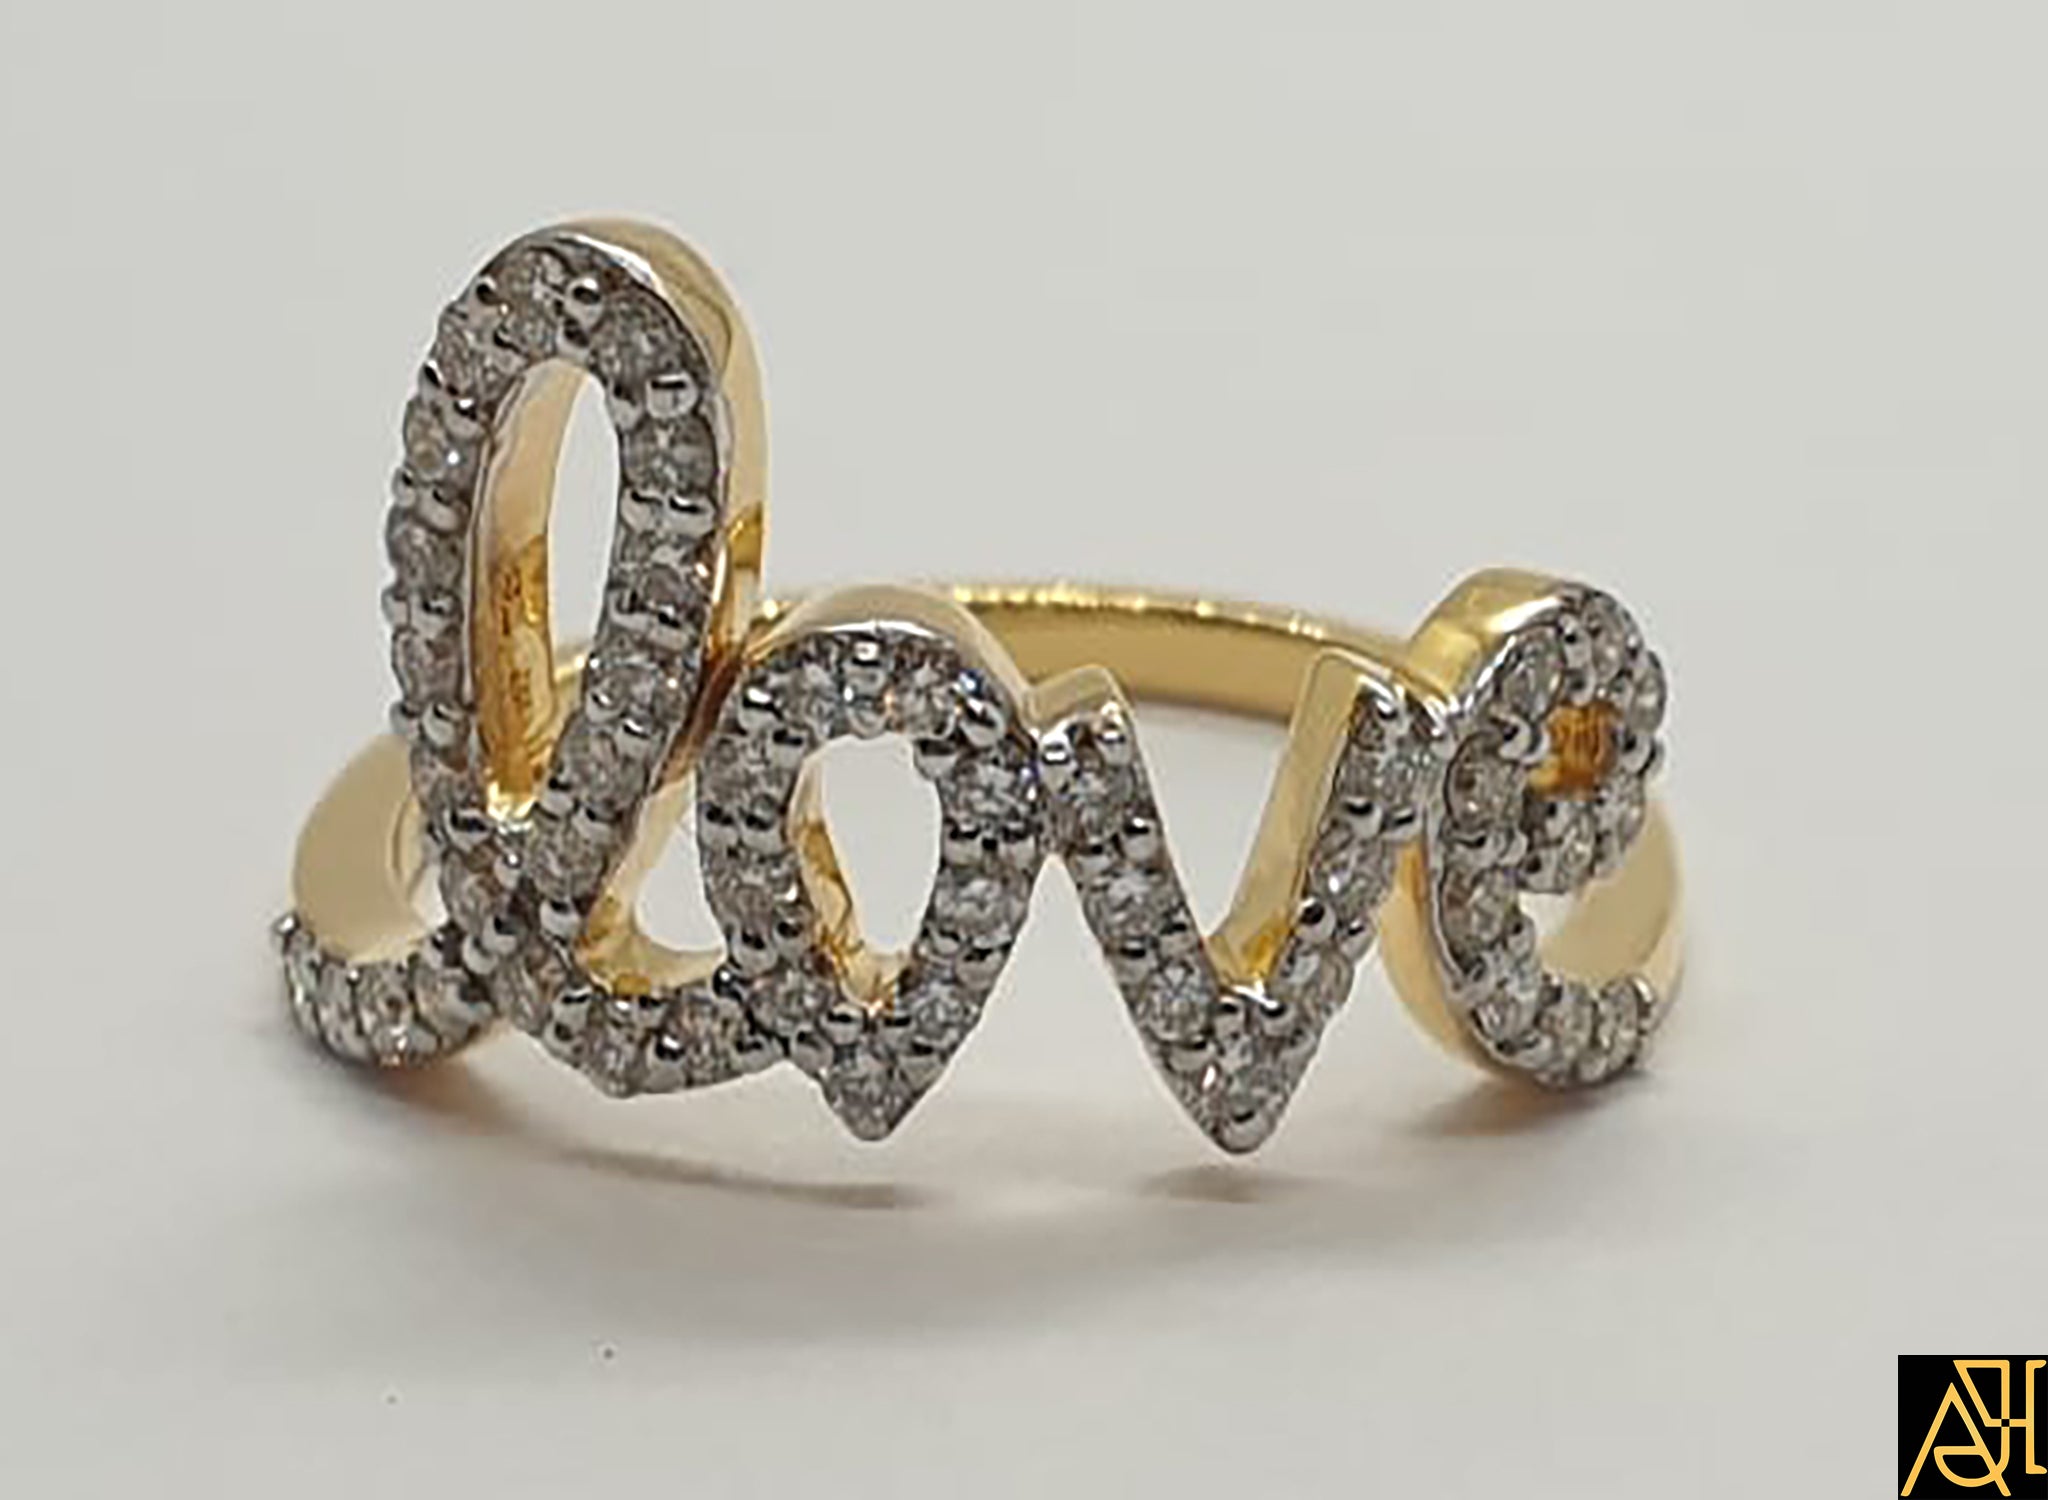 Buy 925 Silver Plated Love Knot Couple Ring (Adjustable Size) Online at Low  Prices in India - Paytmmall.com